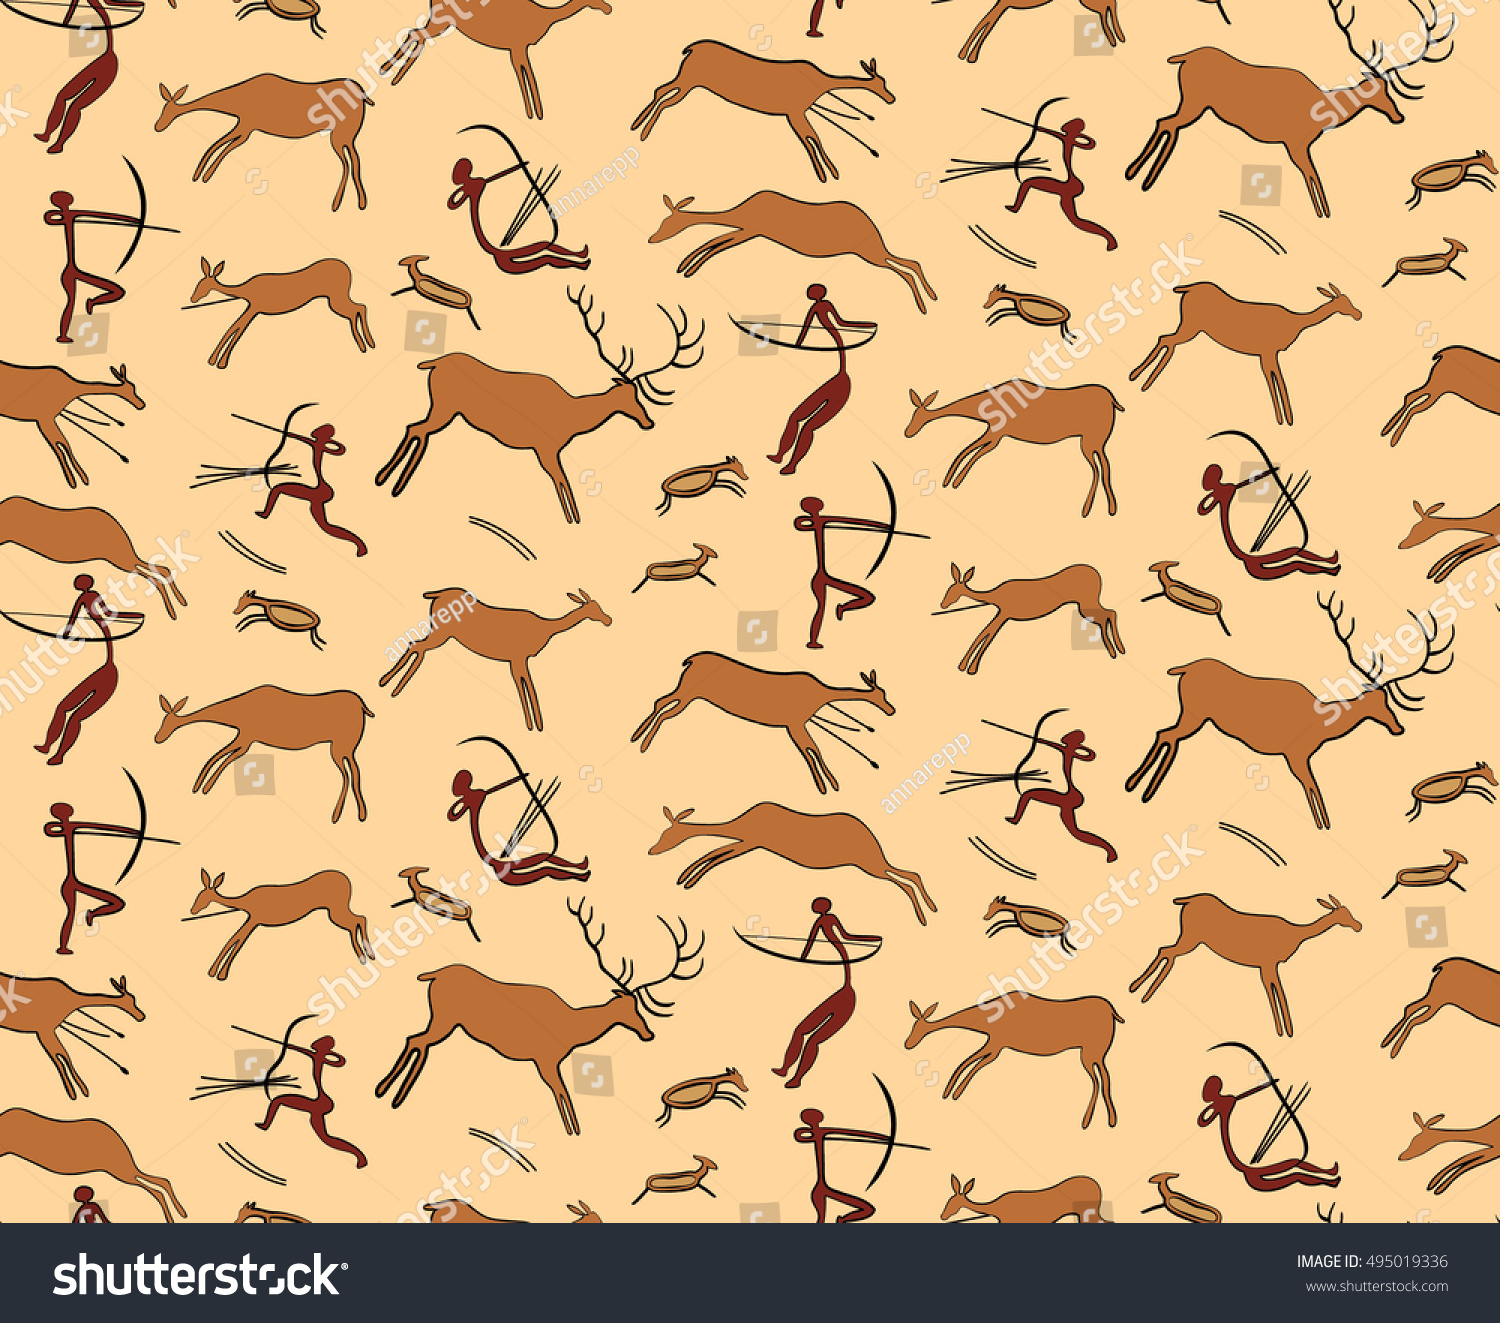 Cave Art Hunting Scene Seamless Vector Stock Vector Royalty Free 495019336